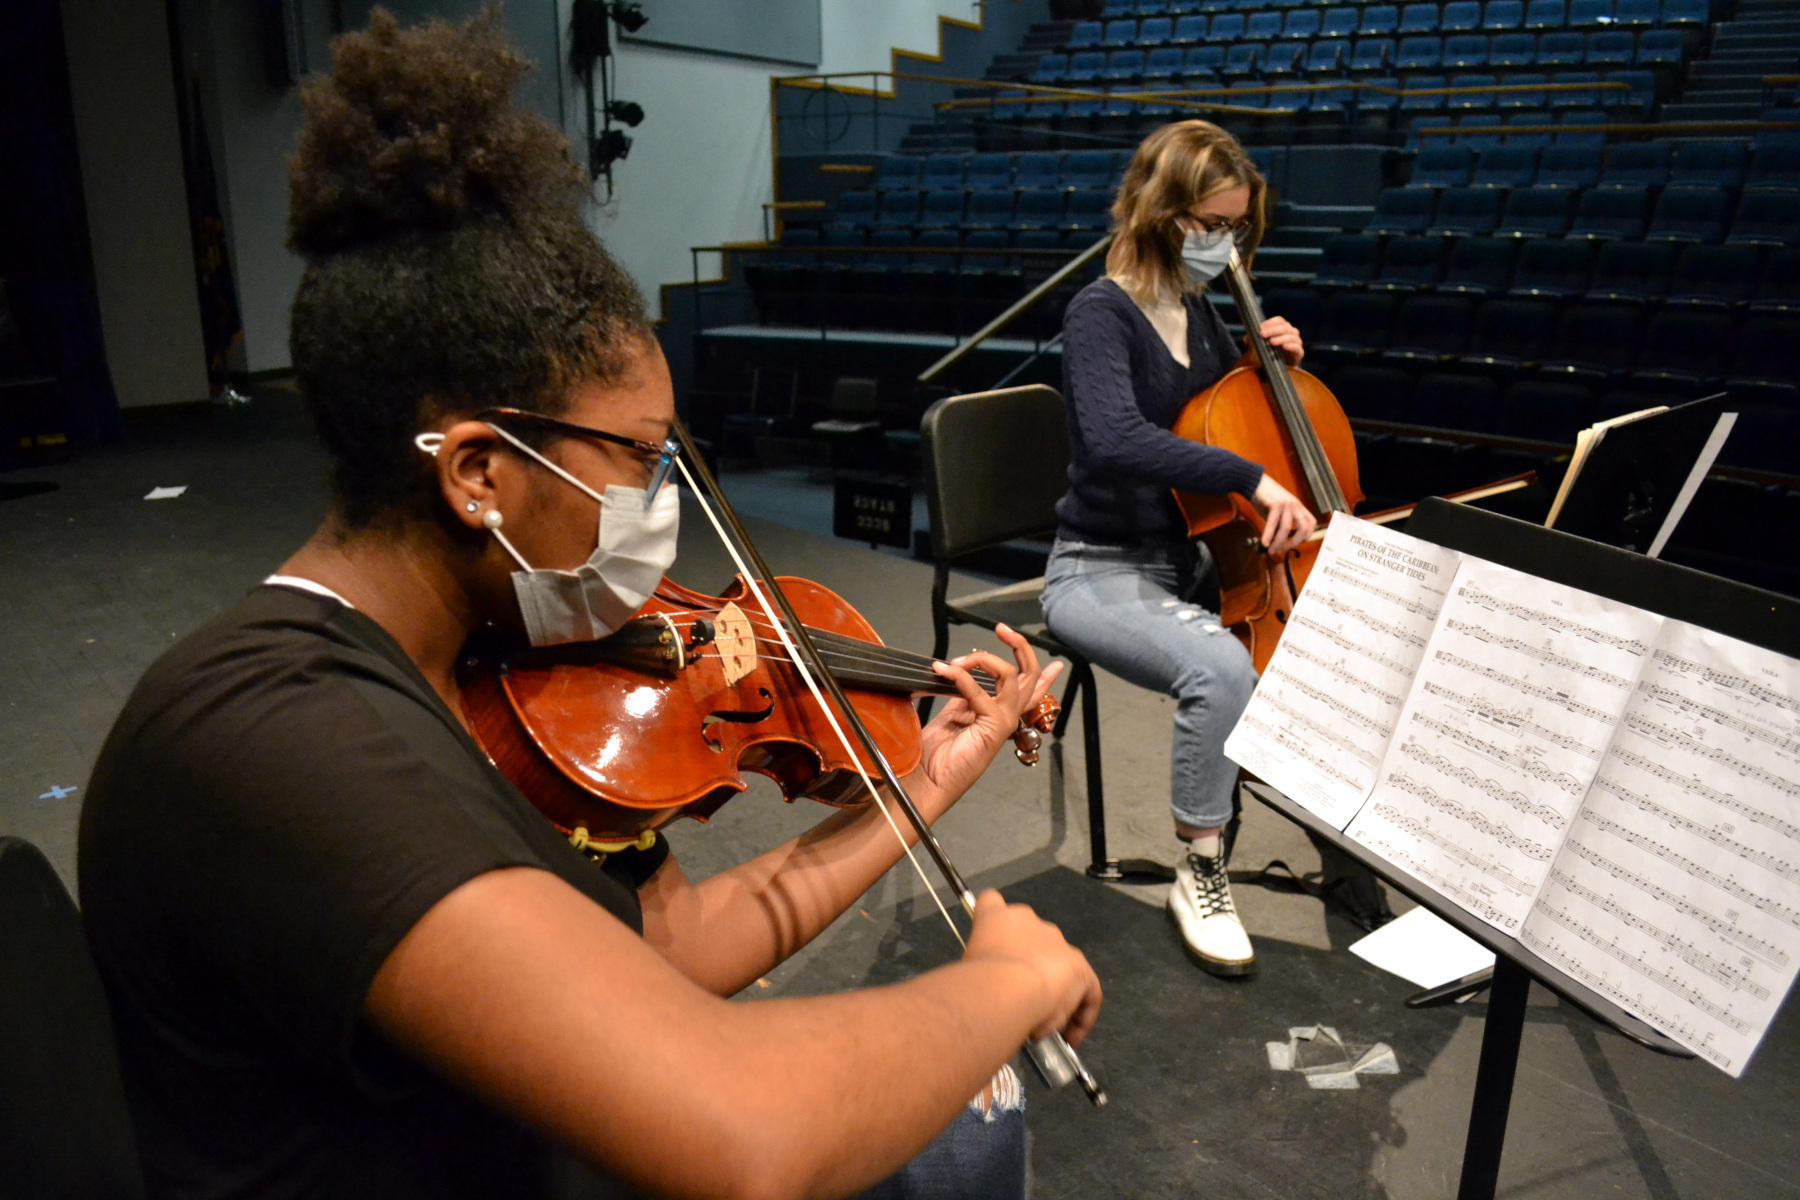 Violinist and cello player rehearsing in auditorium